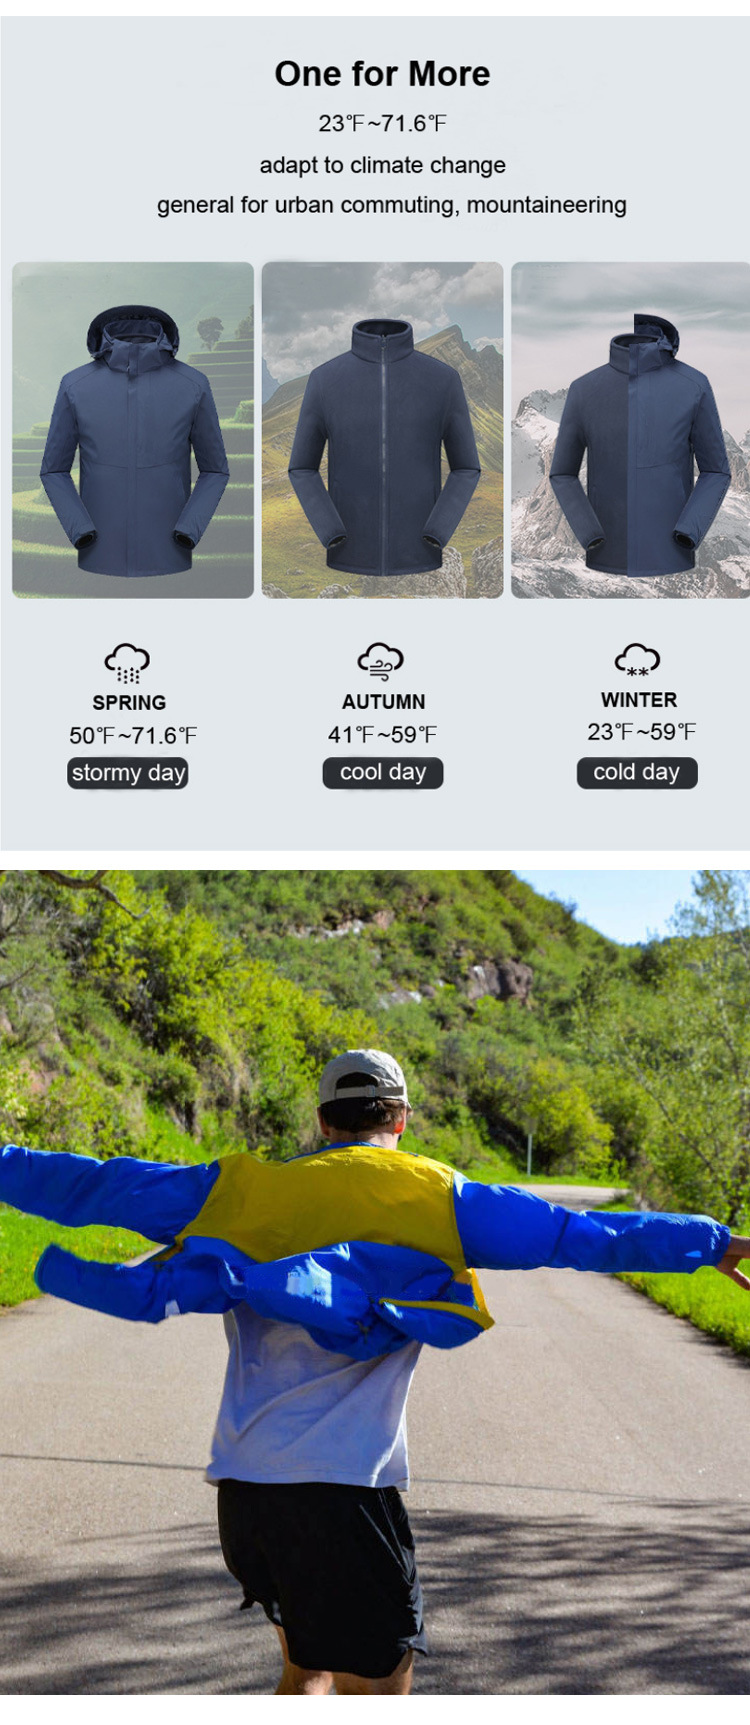 Custom Logo Air Conditioned Clothes All-in-One Cooling Vest for Men Women Outdoor Jacket Cooling Vest Clothing with Fan